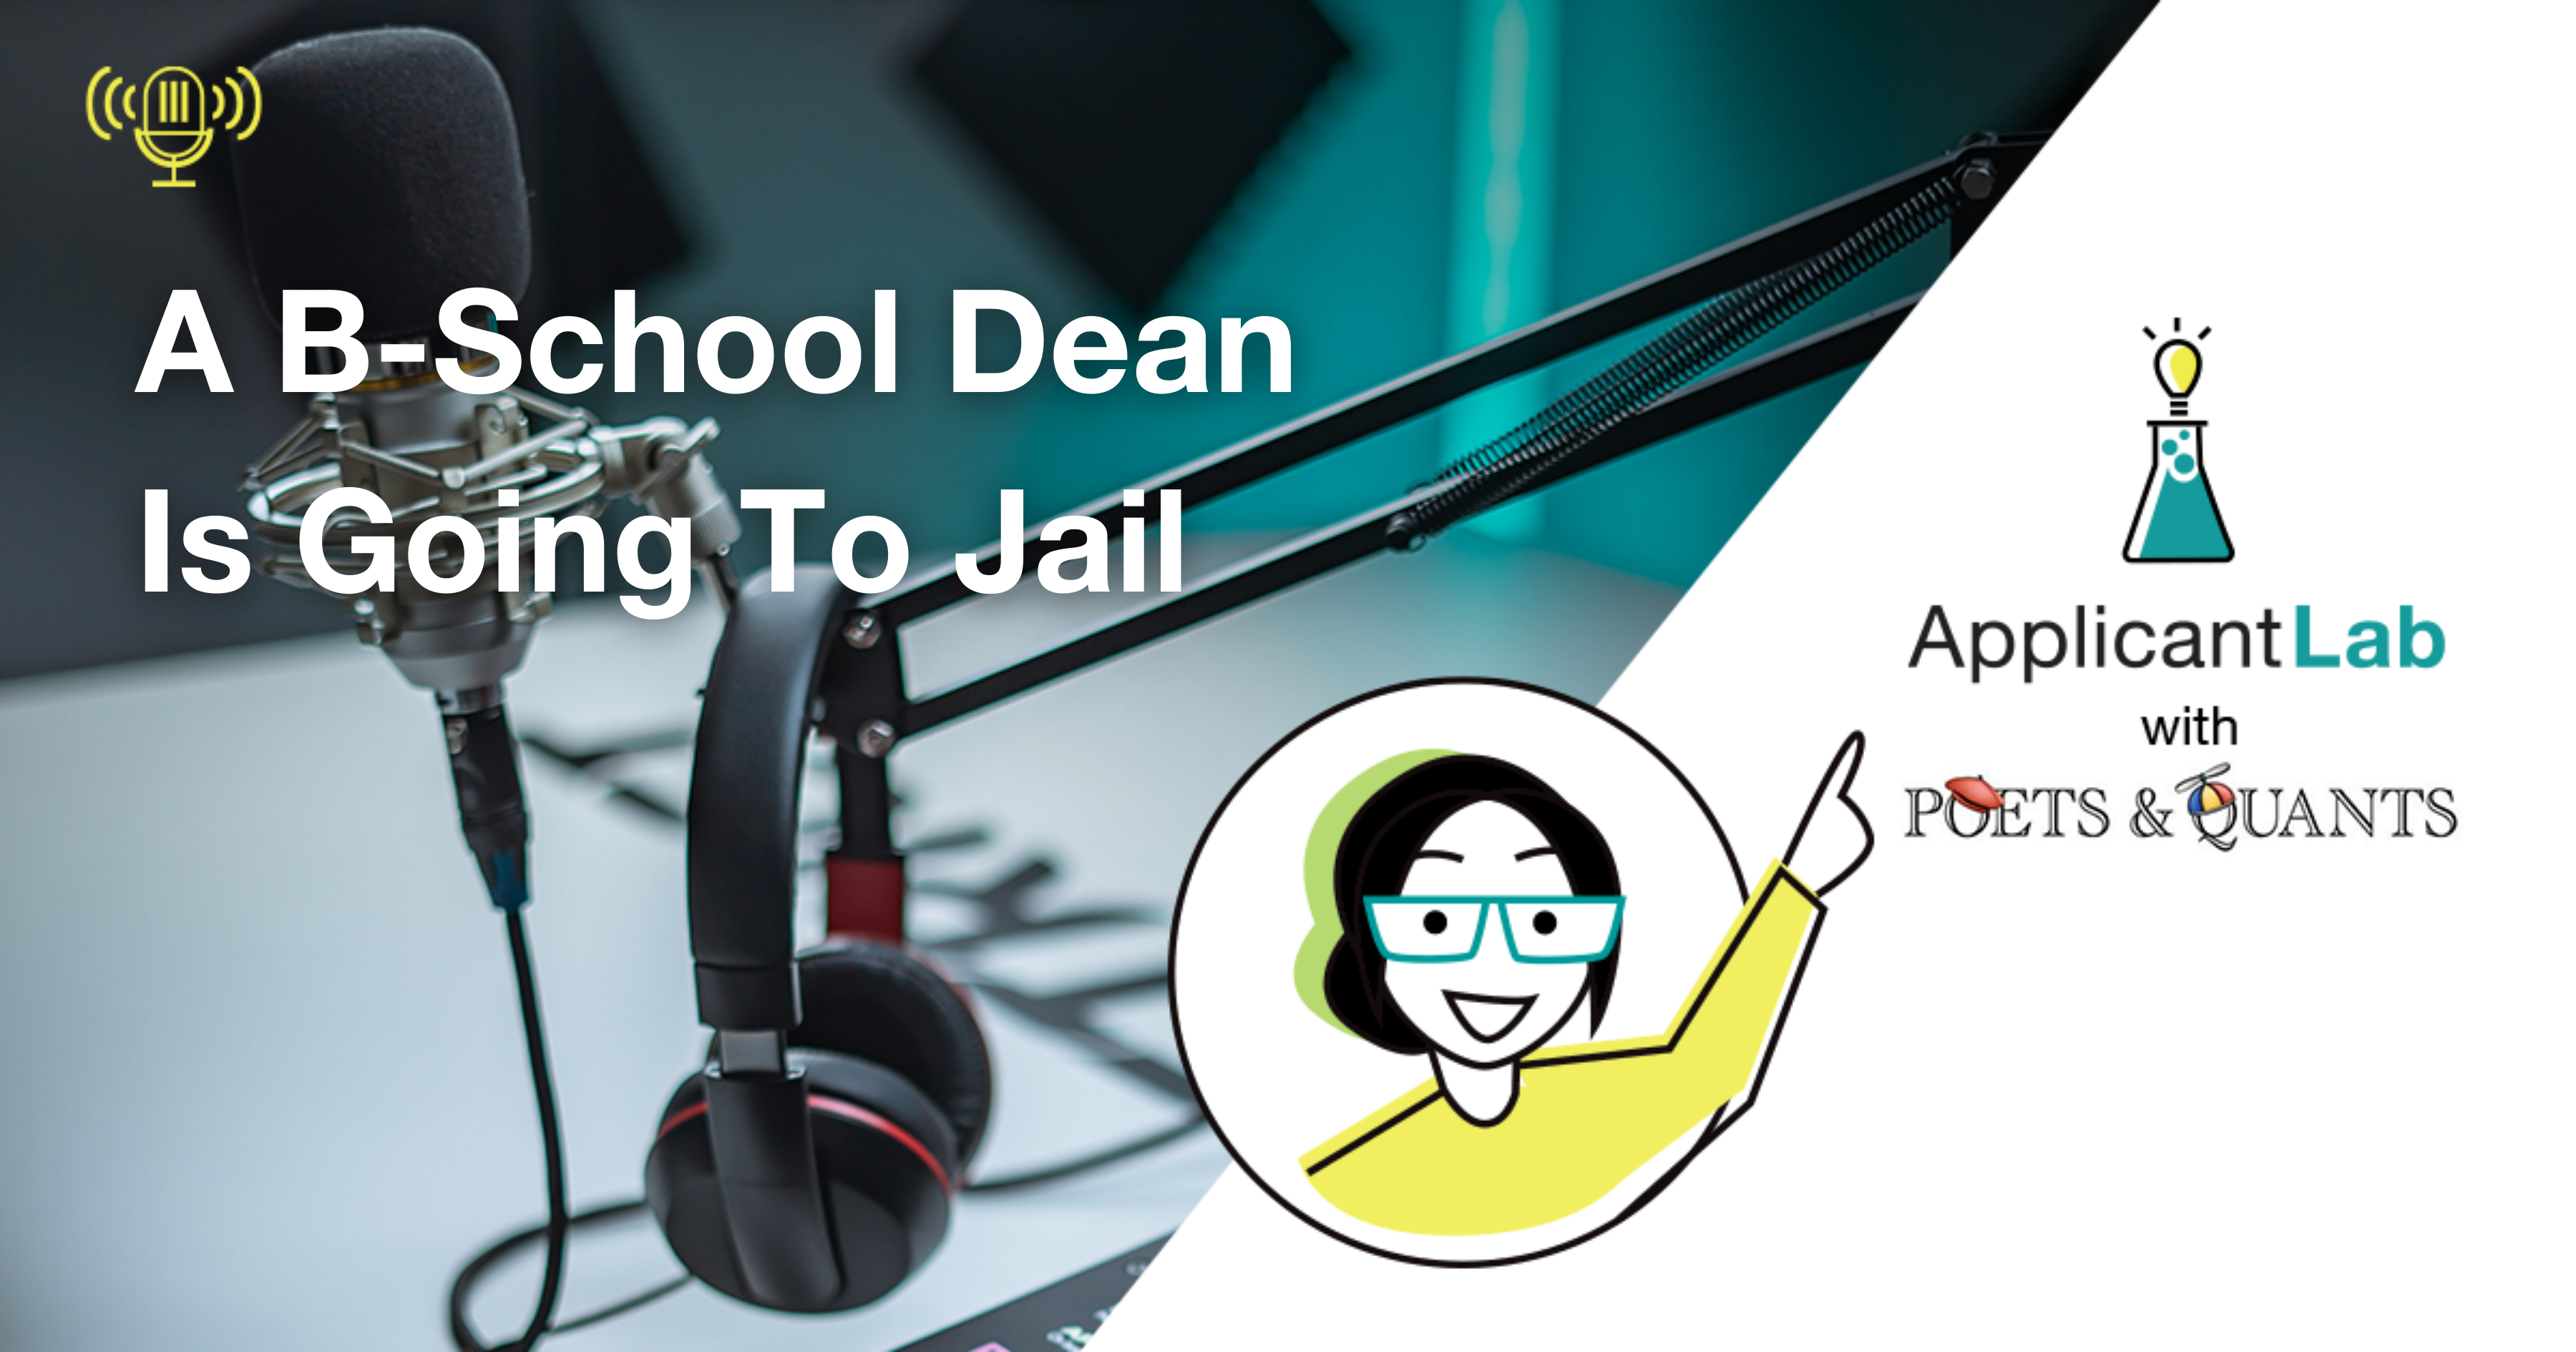 A B-School Dean Is Going To Jail